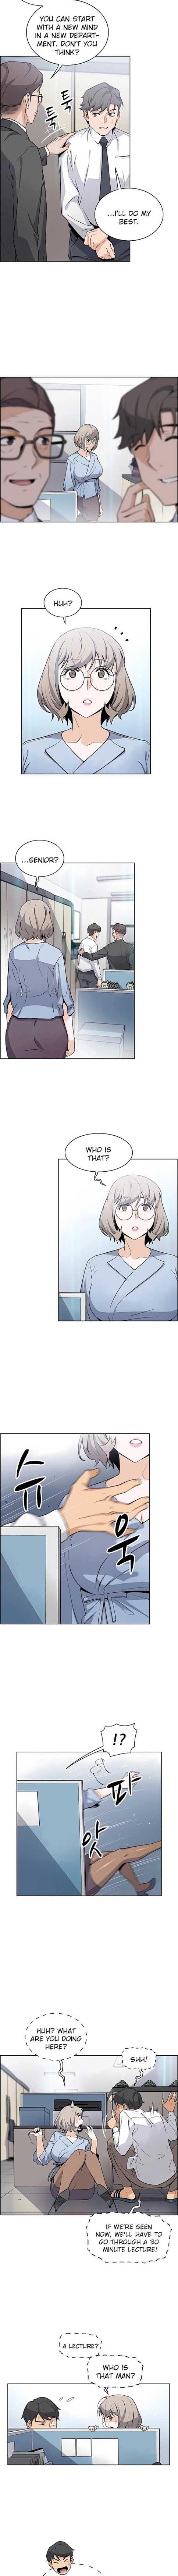 Housekeeper [Neck Pillow, Paper] Ch.49/49 [English] [Manhwa PDF] Completed 276